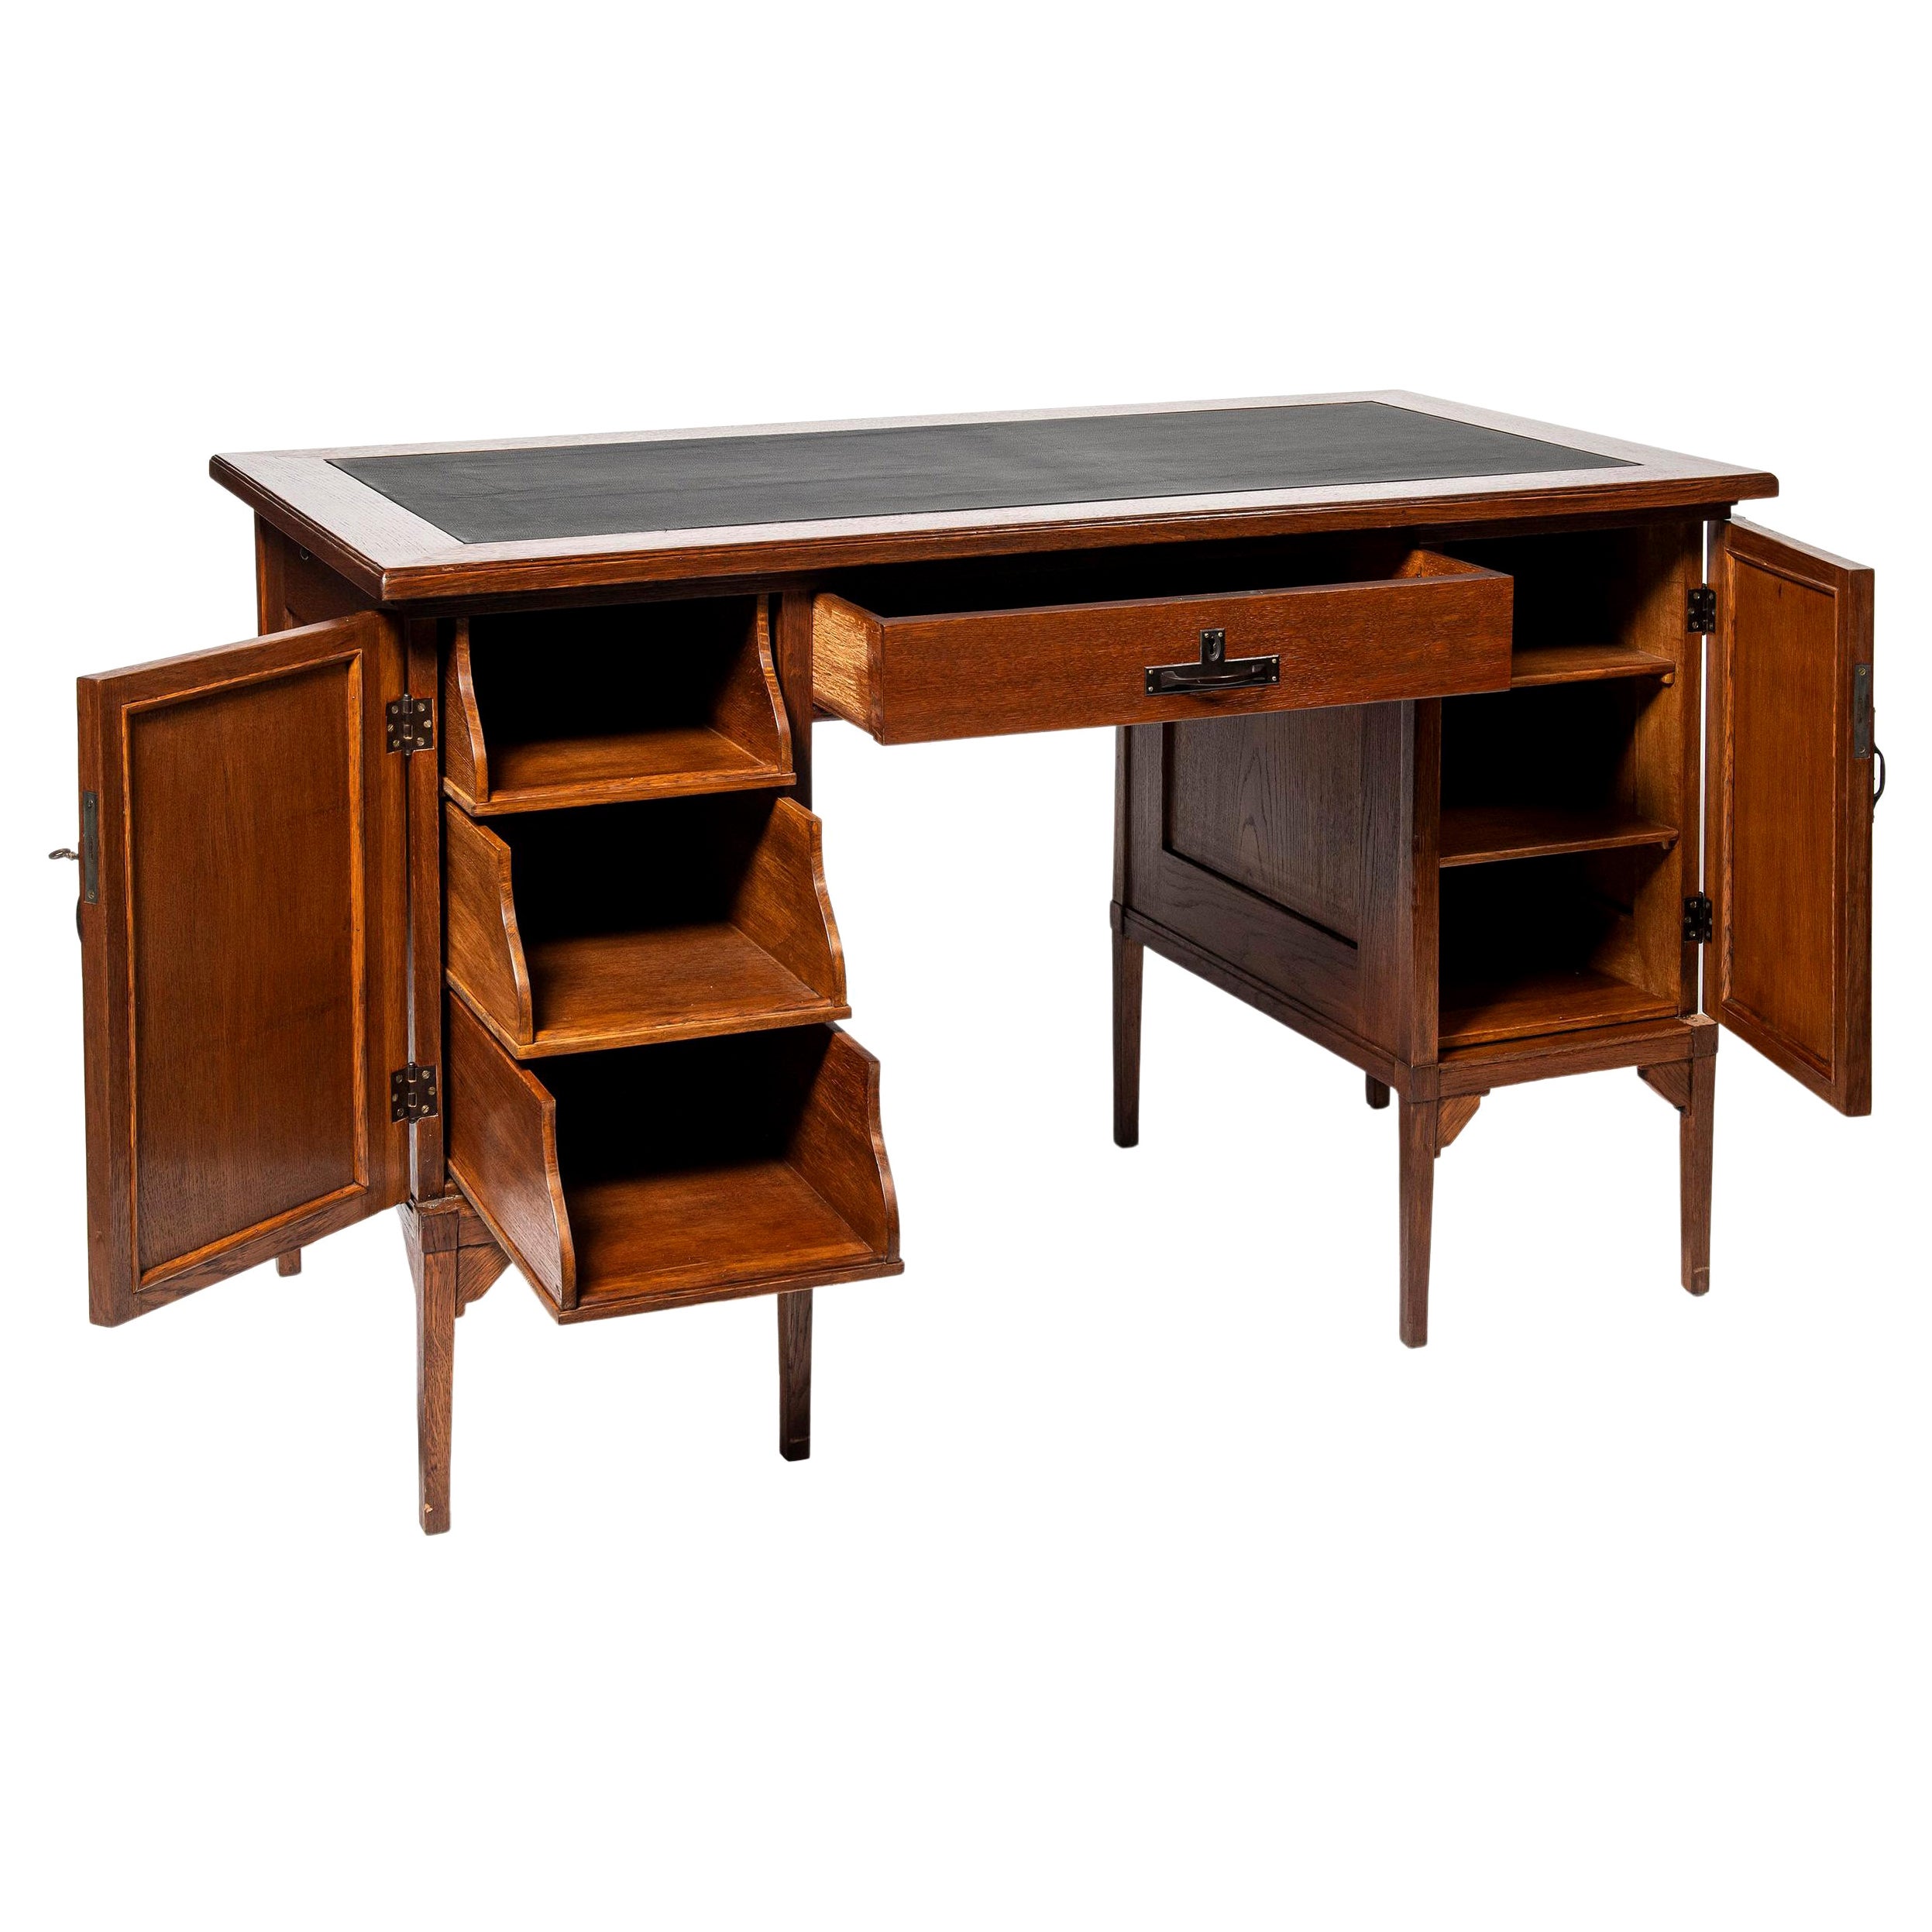 Oak Wood, Iron and Leather Desk, Scotland, Early 20th Century